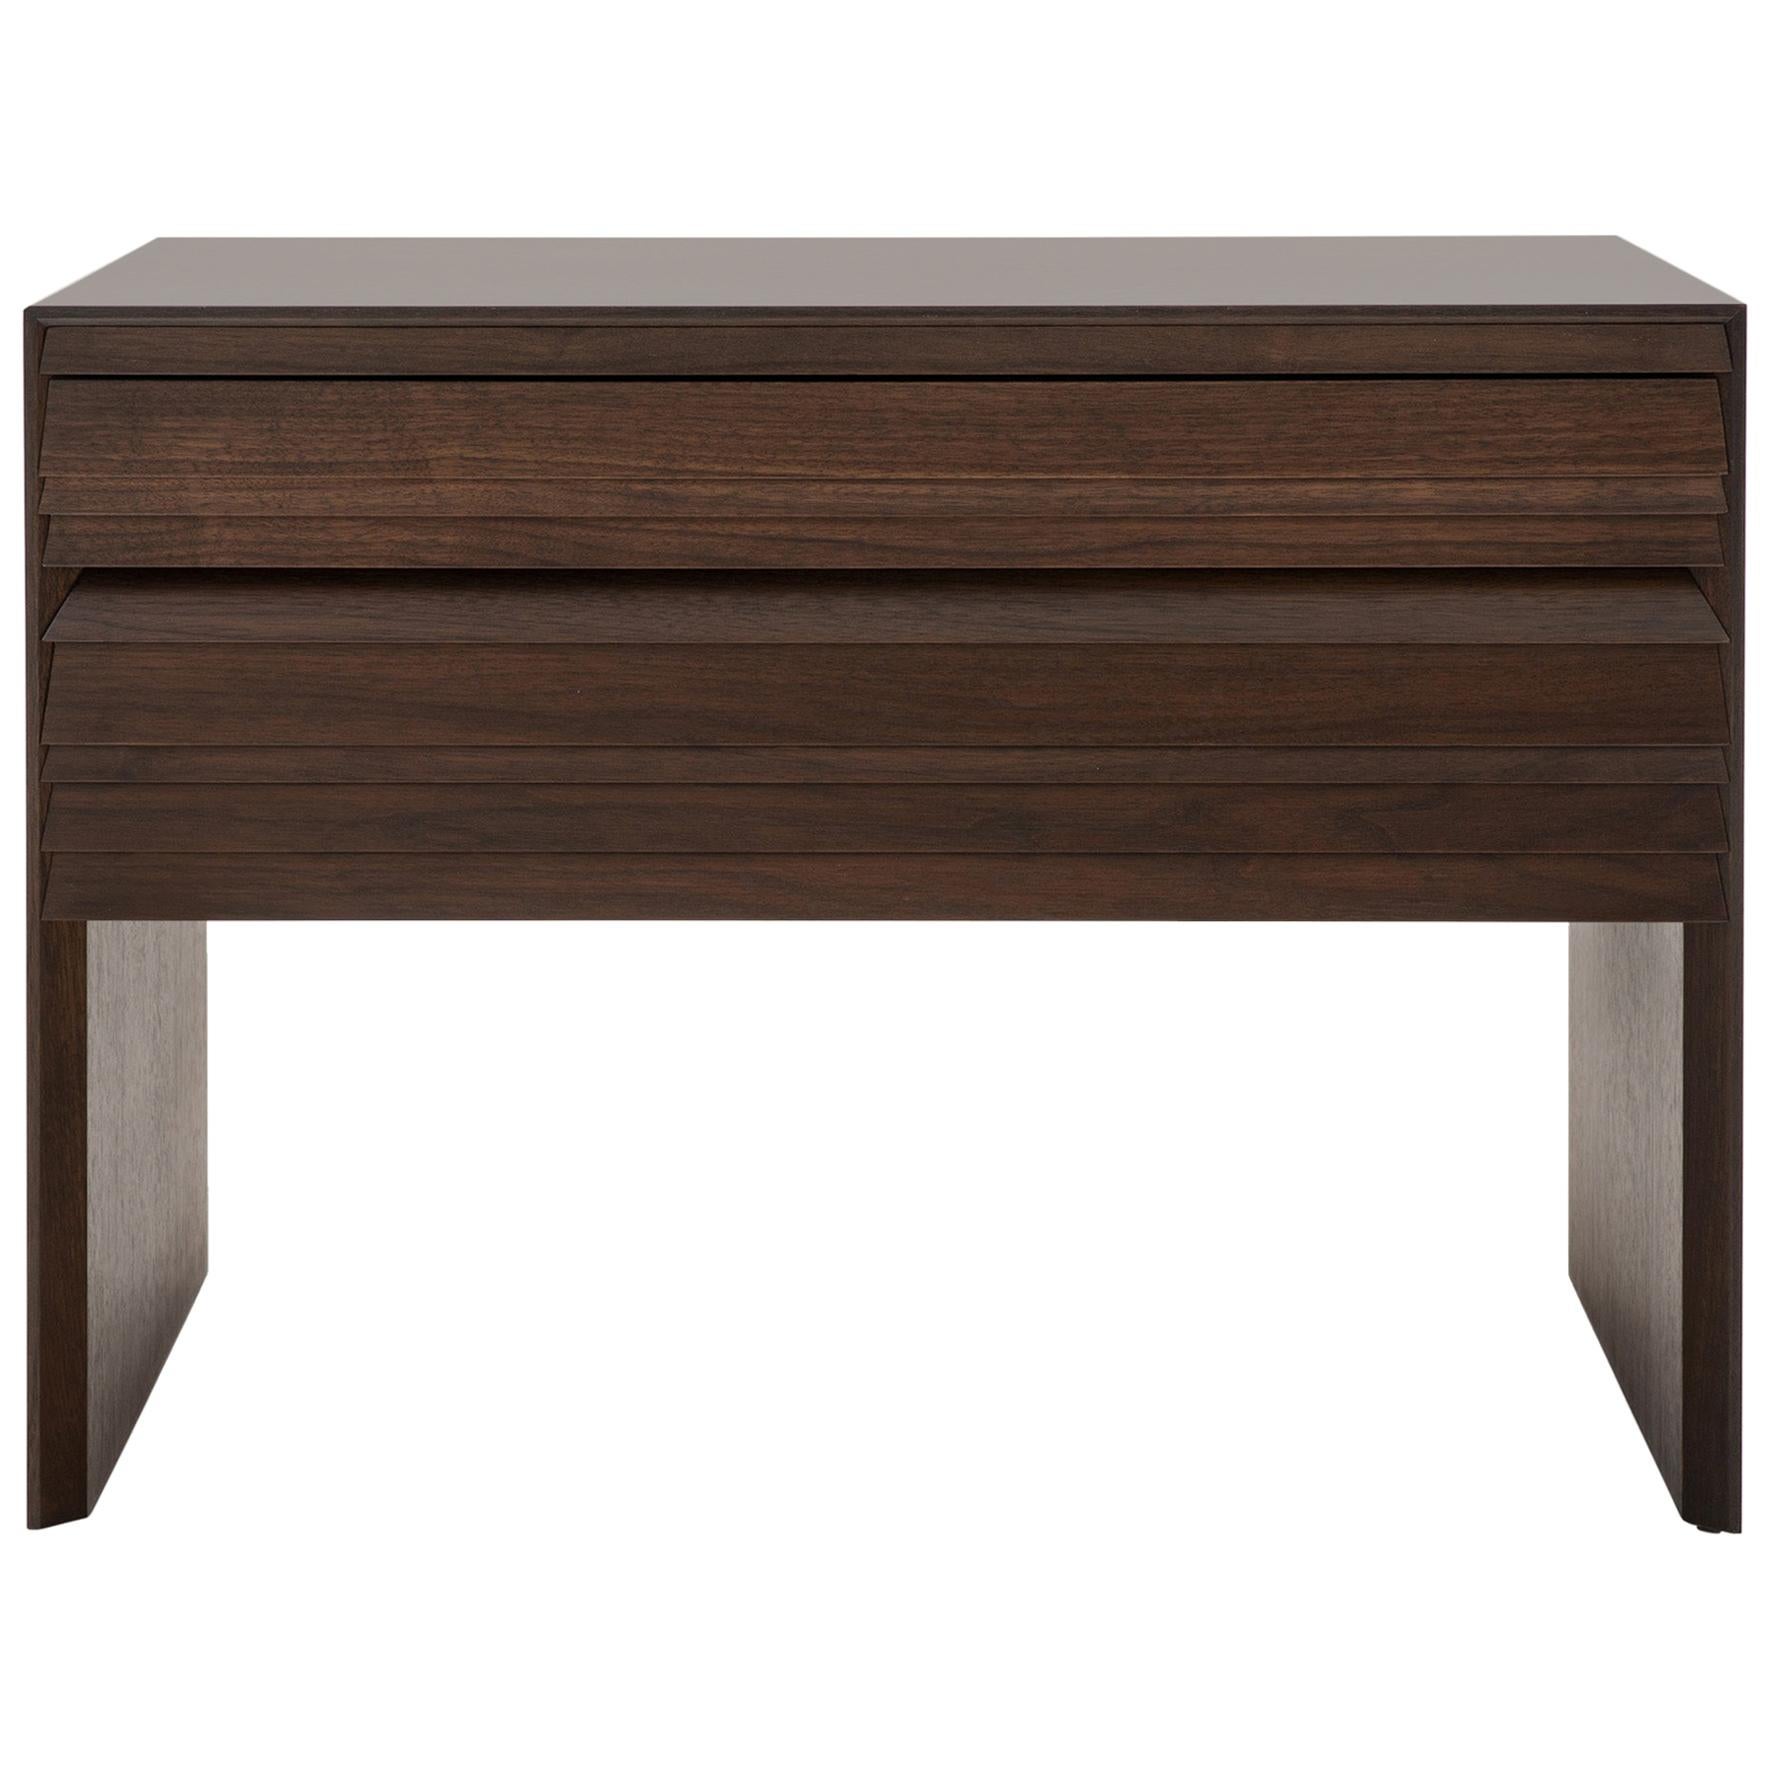 HOLLY HUNT Louvered Bedside Table in Dark Walnut Finish